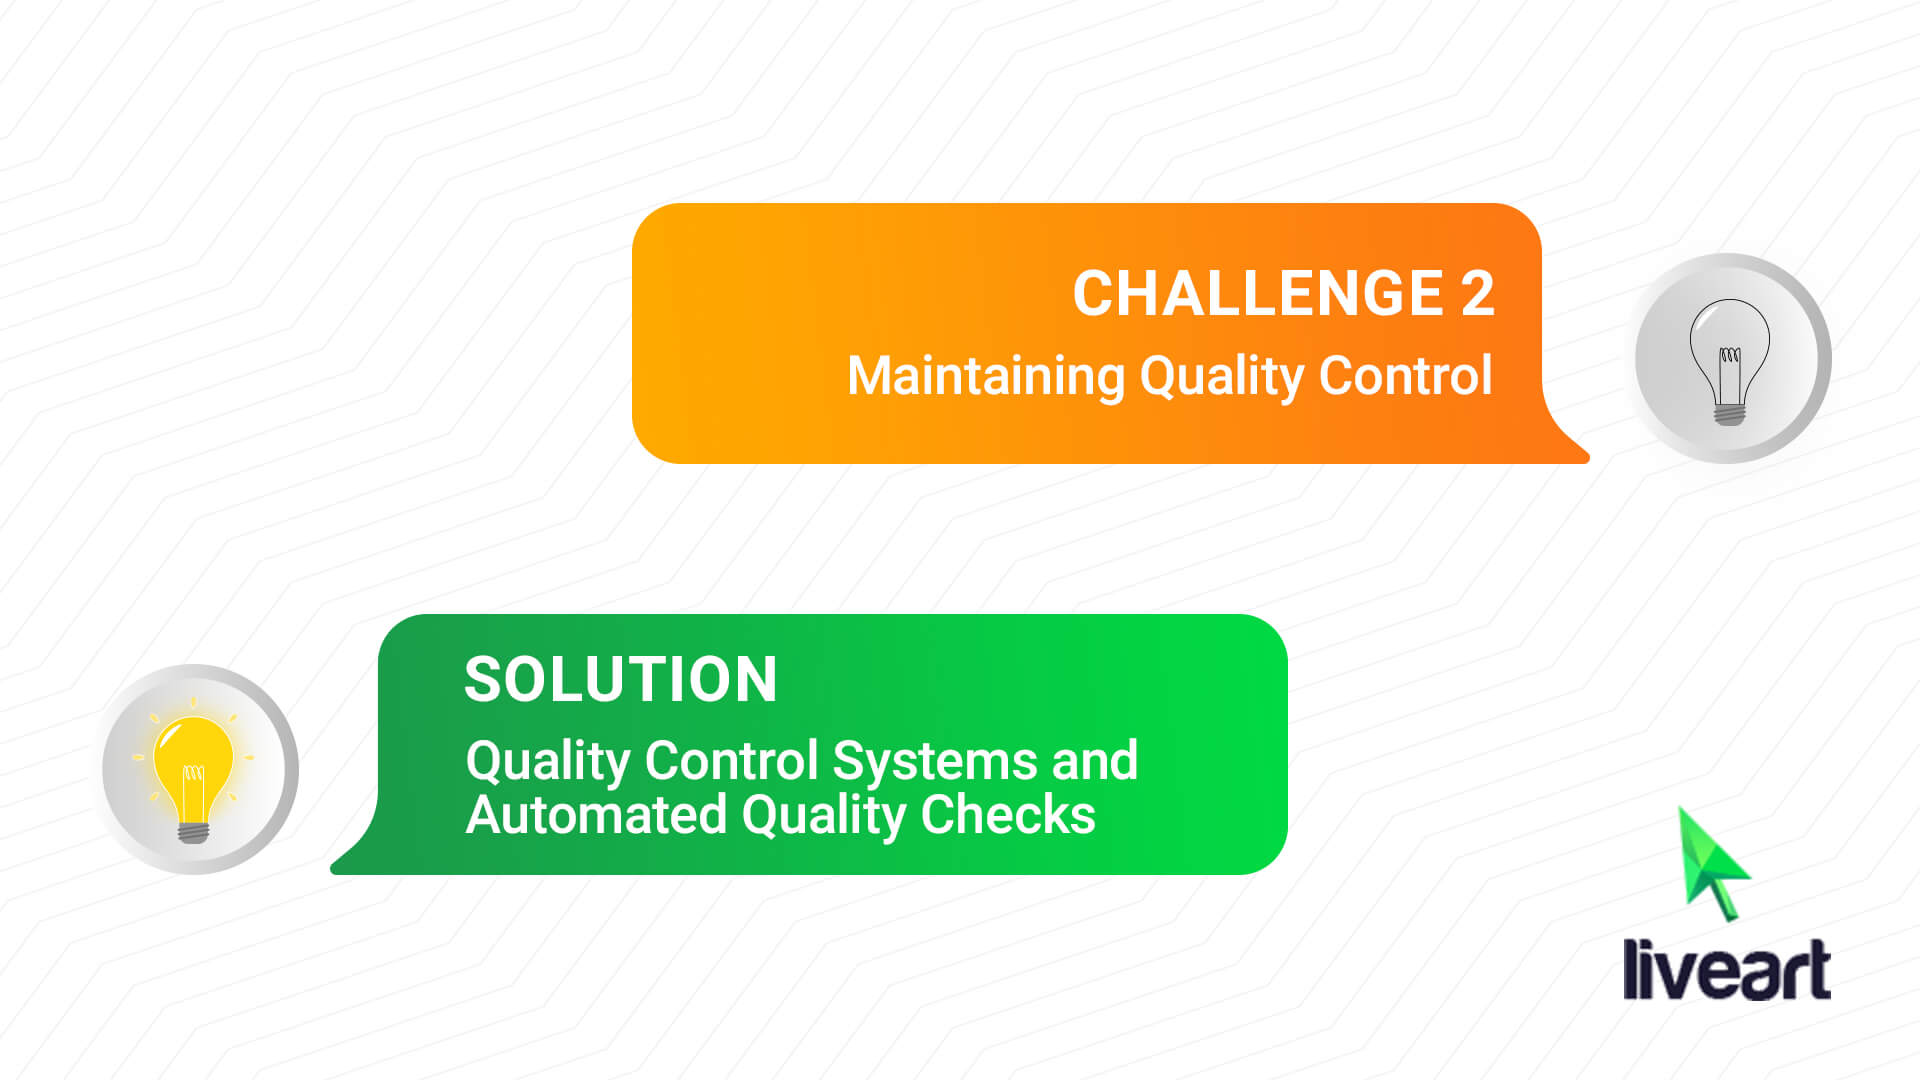 Challenge 2: Maintaining Quality Control